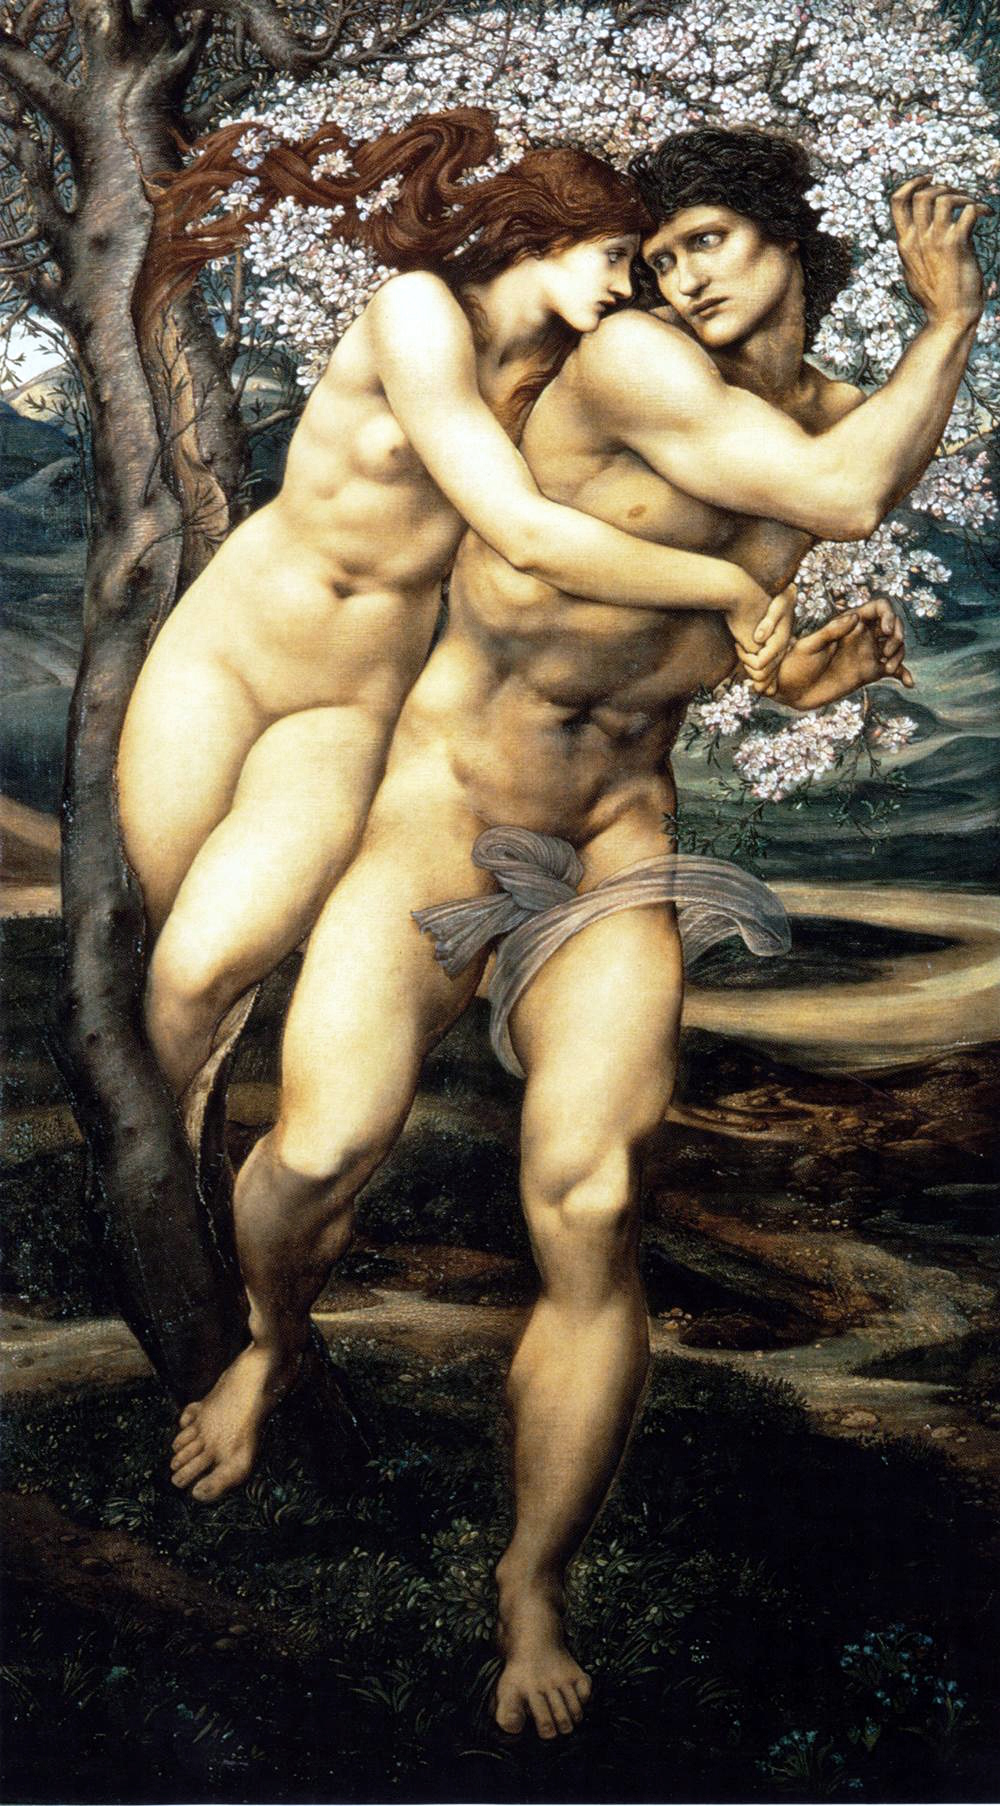 Edward Burne-Jones, The Tree of Forgiveness (1881 - 1882), oil on canvas, 111 x 186 cm. Collection of The Lady Lever Art Gallery, National Museums Liverpool, England